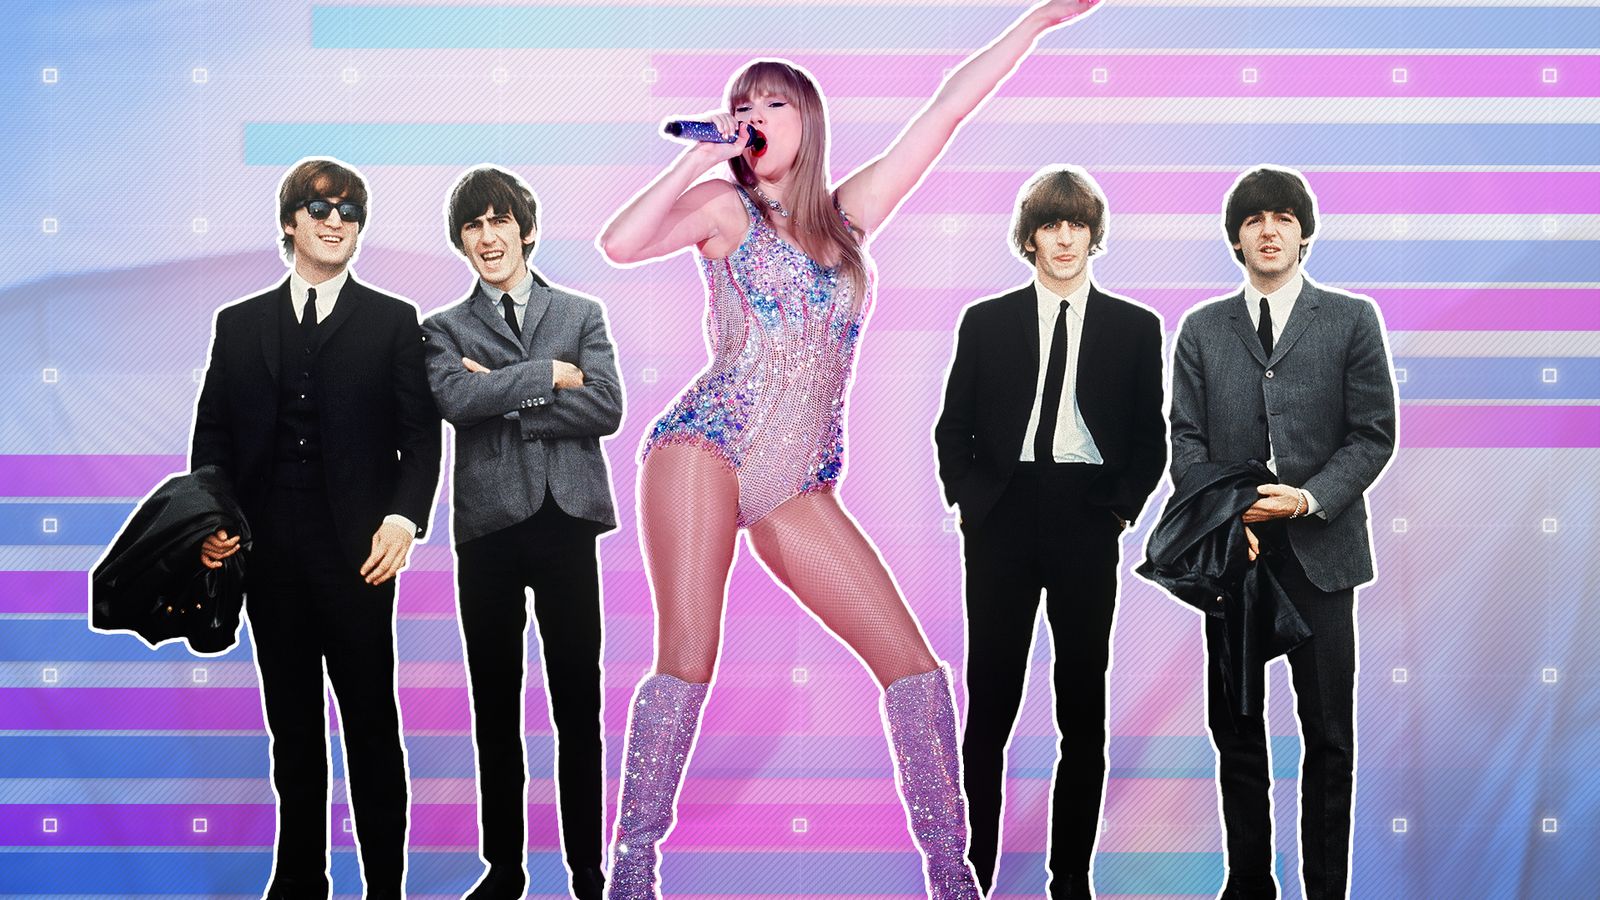 Taylor Swift v The Beatles: As the Eras tour hits the UK, how does the star compare against the biggest band of all time?